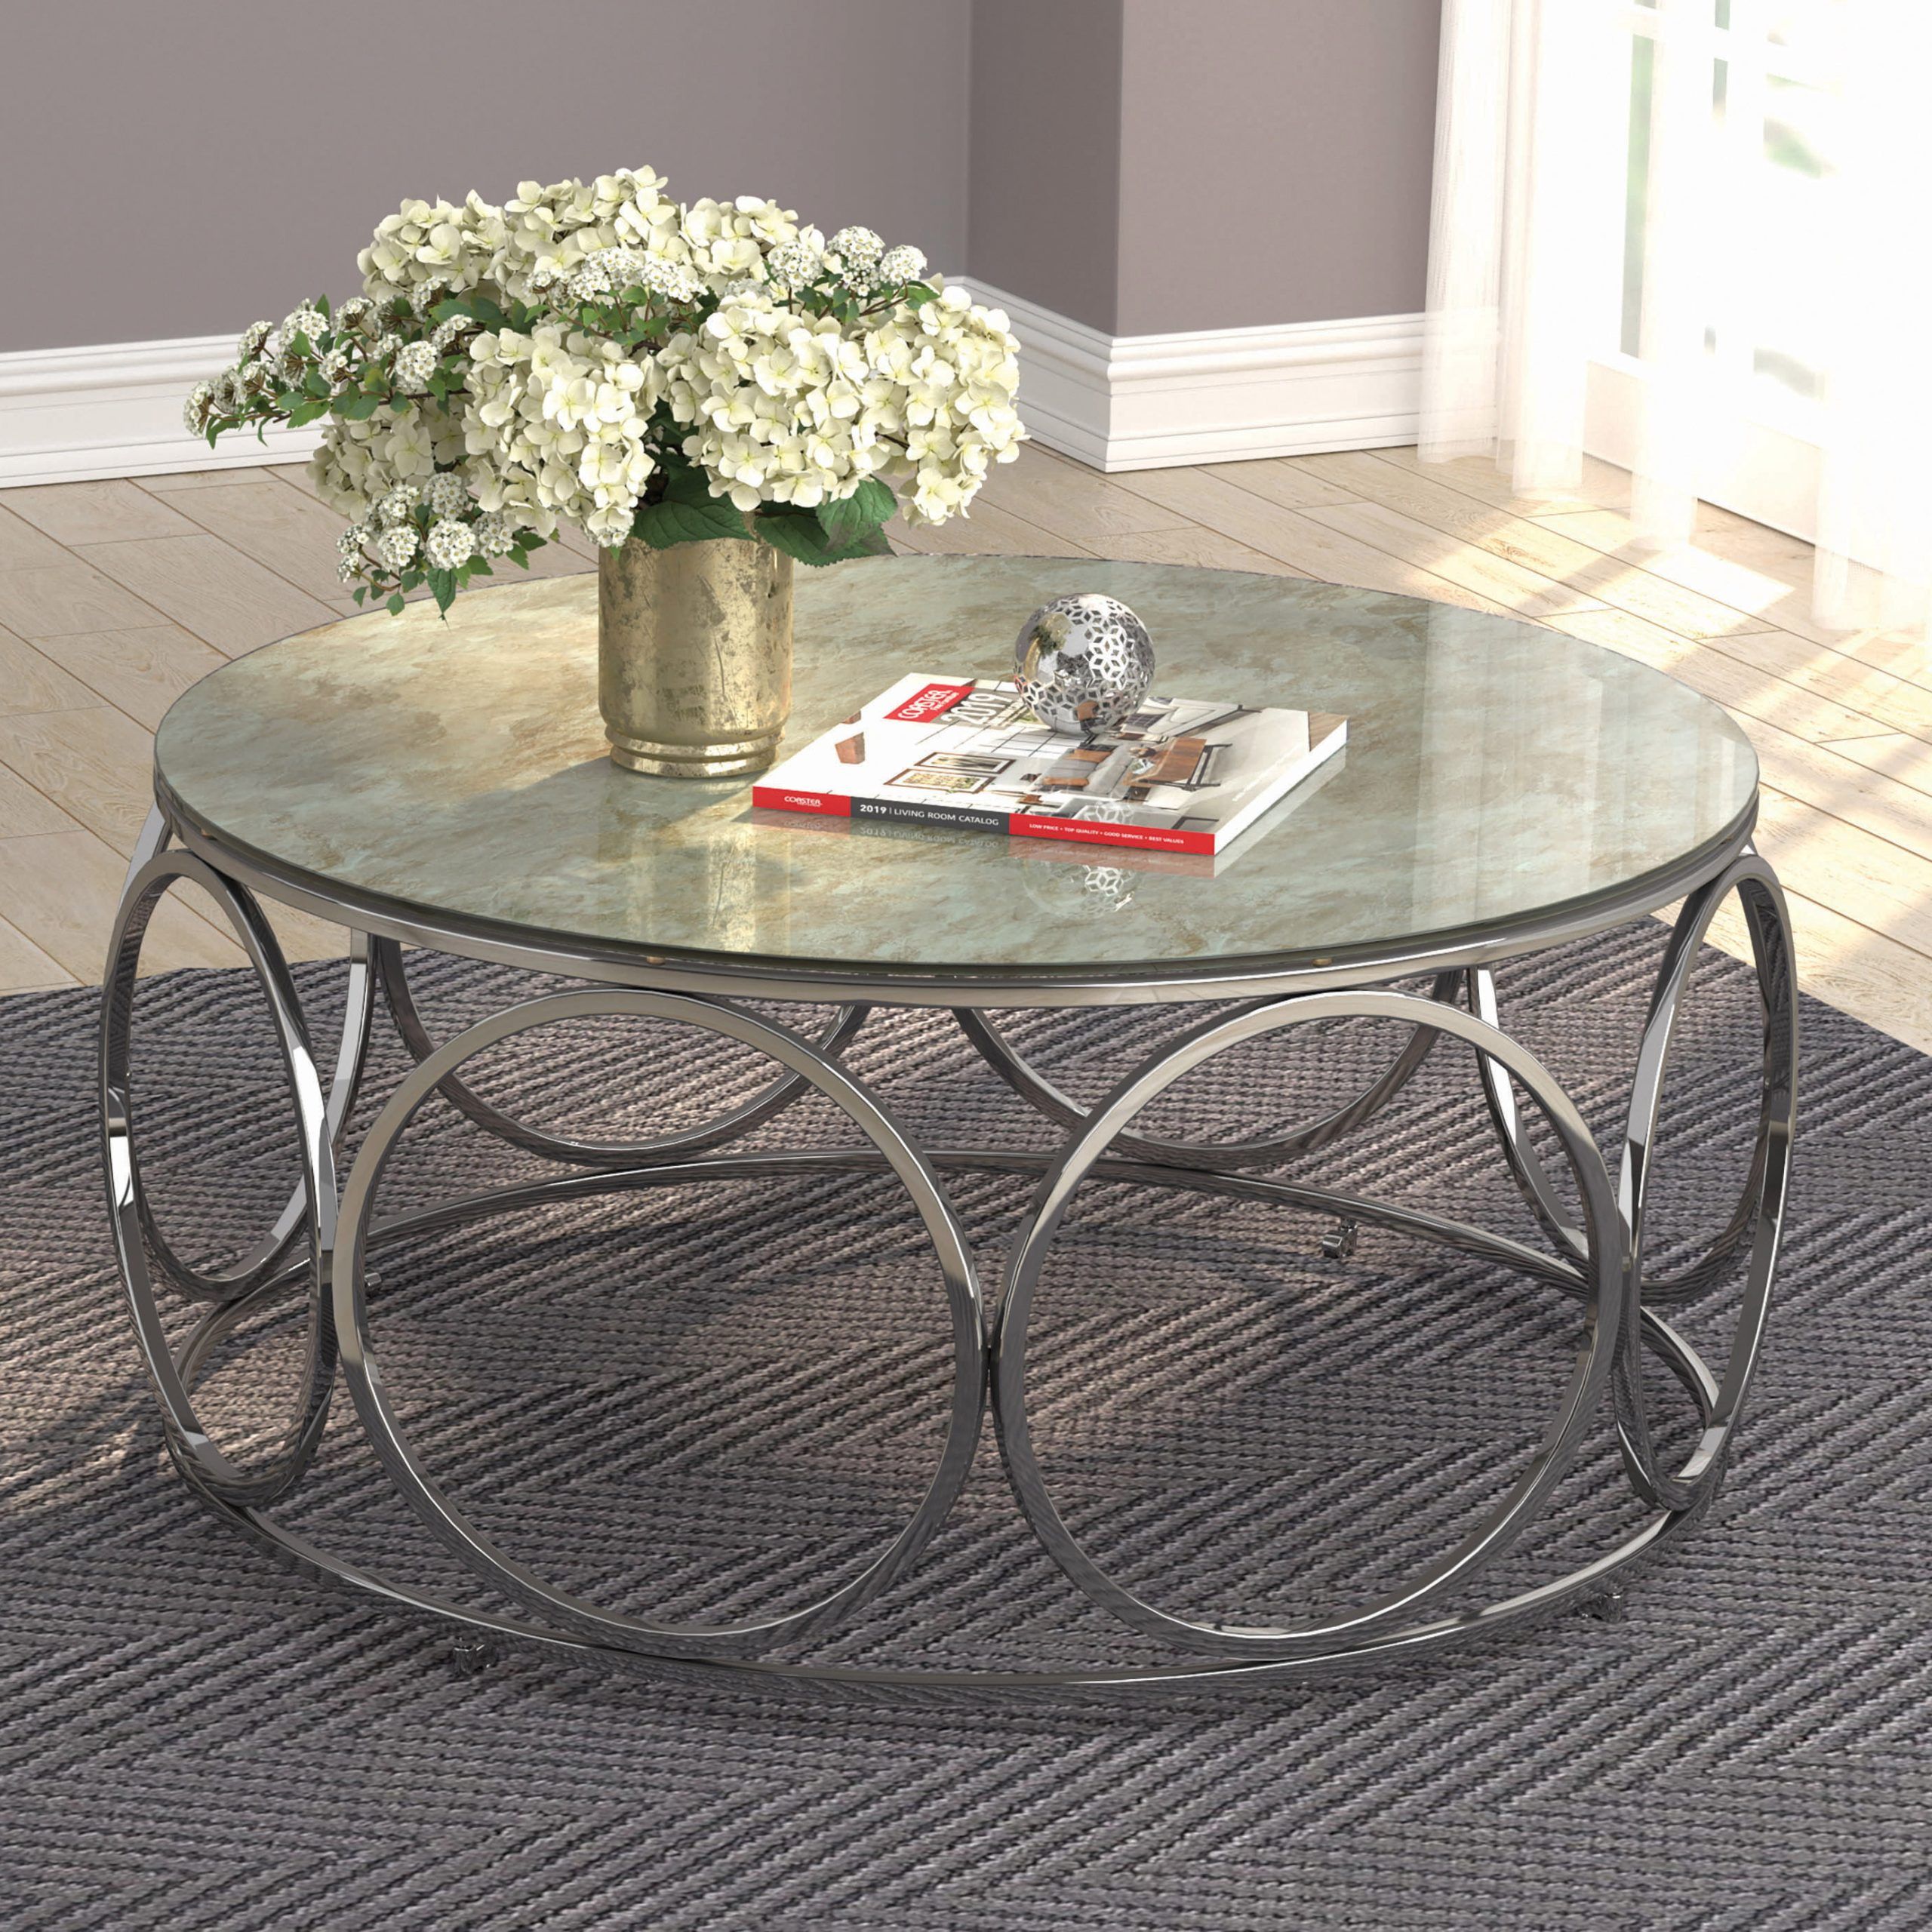 Round Coffee Table With Casters Beige Marble And Chrome – Walmart Within Round Coffee Tables (View 8 of 20)